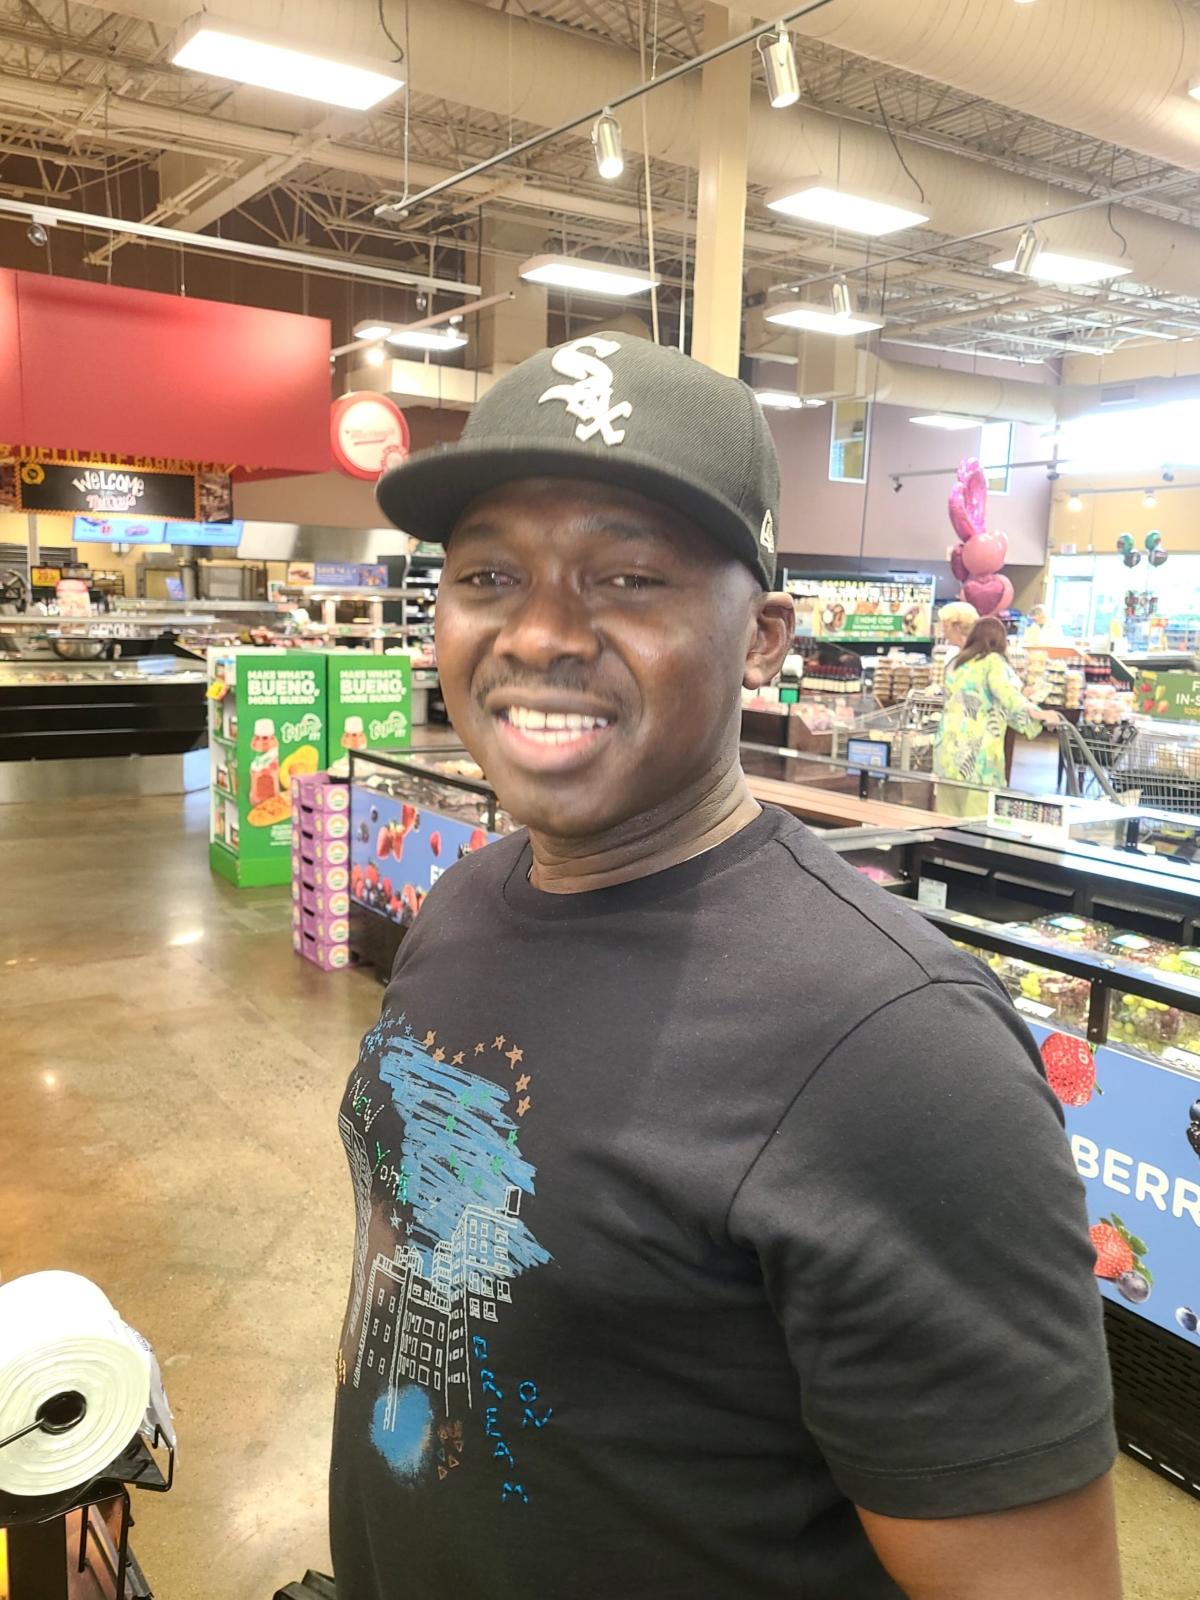 Alex, who did not give his last name, at the Kroger supermarket in Sandy Springs, Ga. on Aug. 16, 2023. (Dan M. Berger/The Epoch Times)